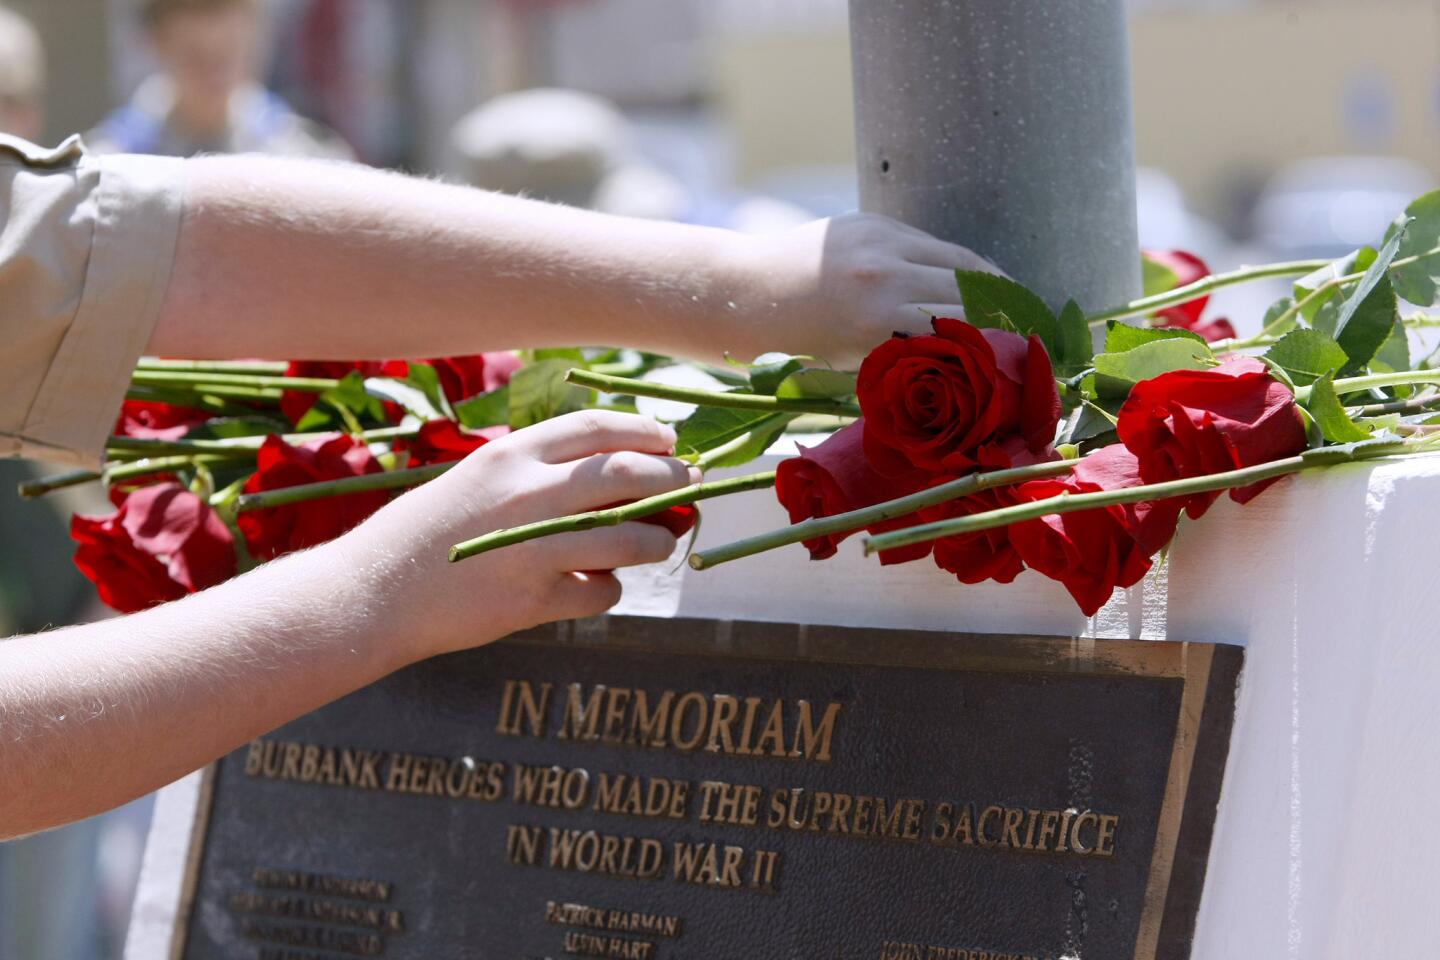 Boy Scouts place roses on memorial during the Ceremony of the Rose at the Memorial Day Ceremony at McCambridge Park War Memorial in Burbank on Monday, May 26, 2014.